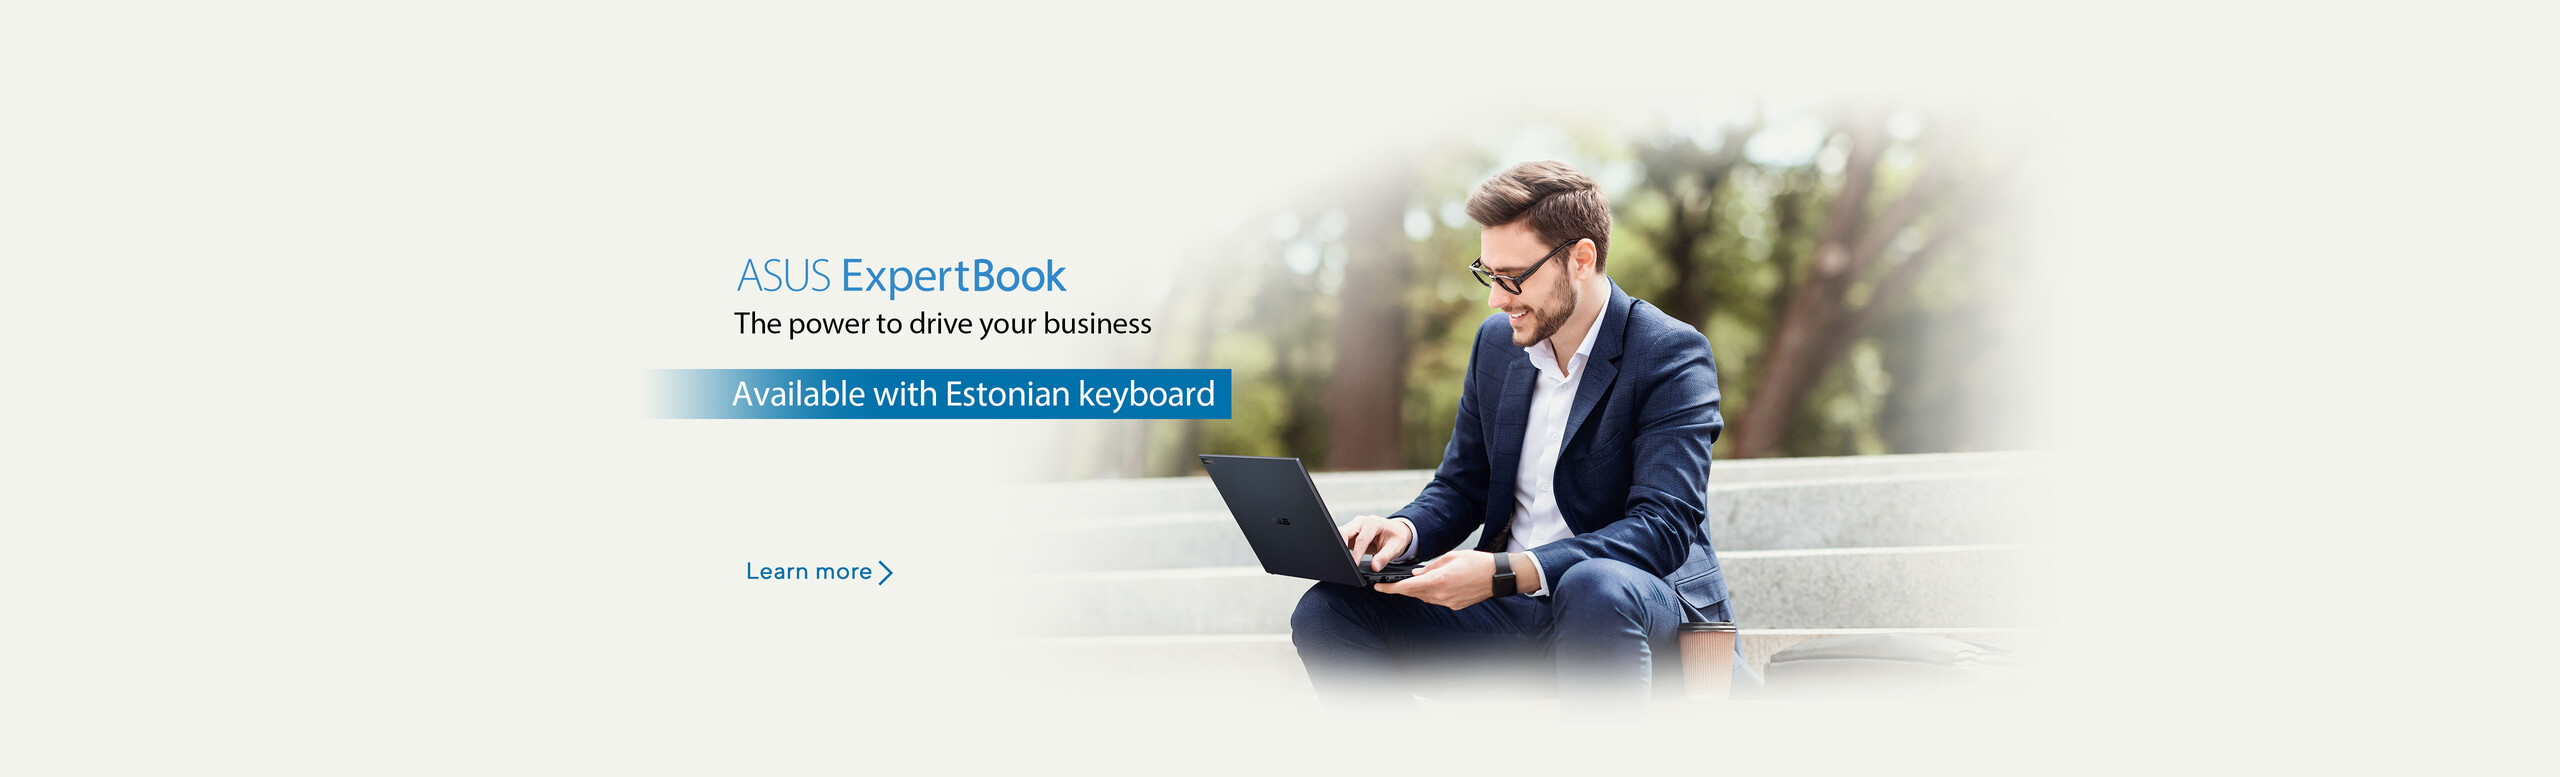 The latest ExpertBook models are available for order with Estonian keyboard